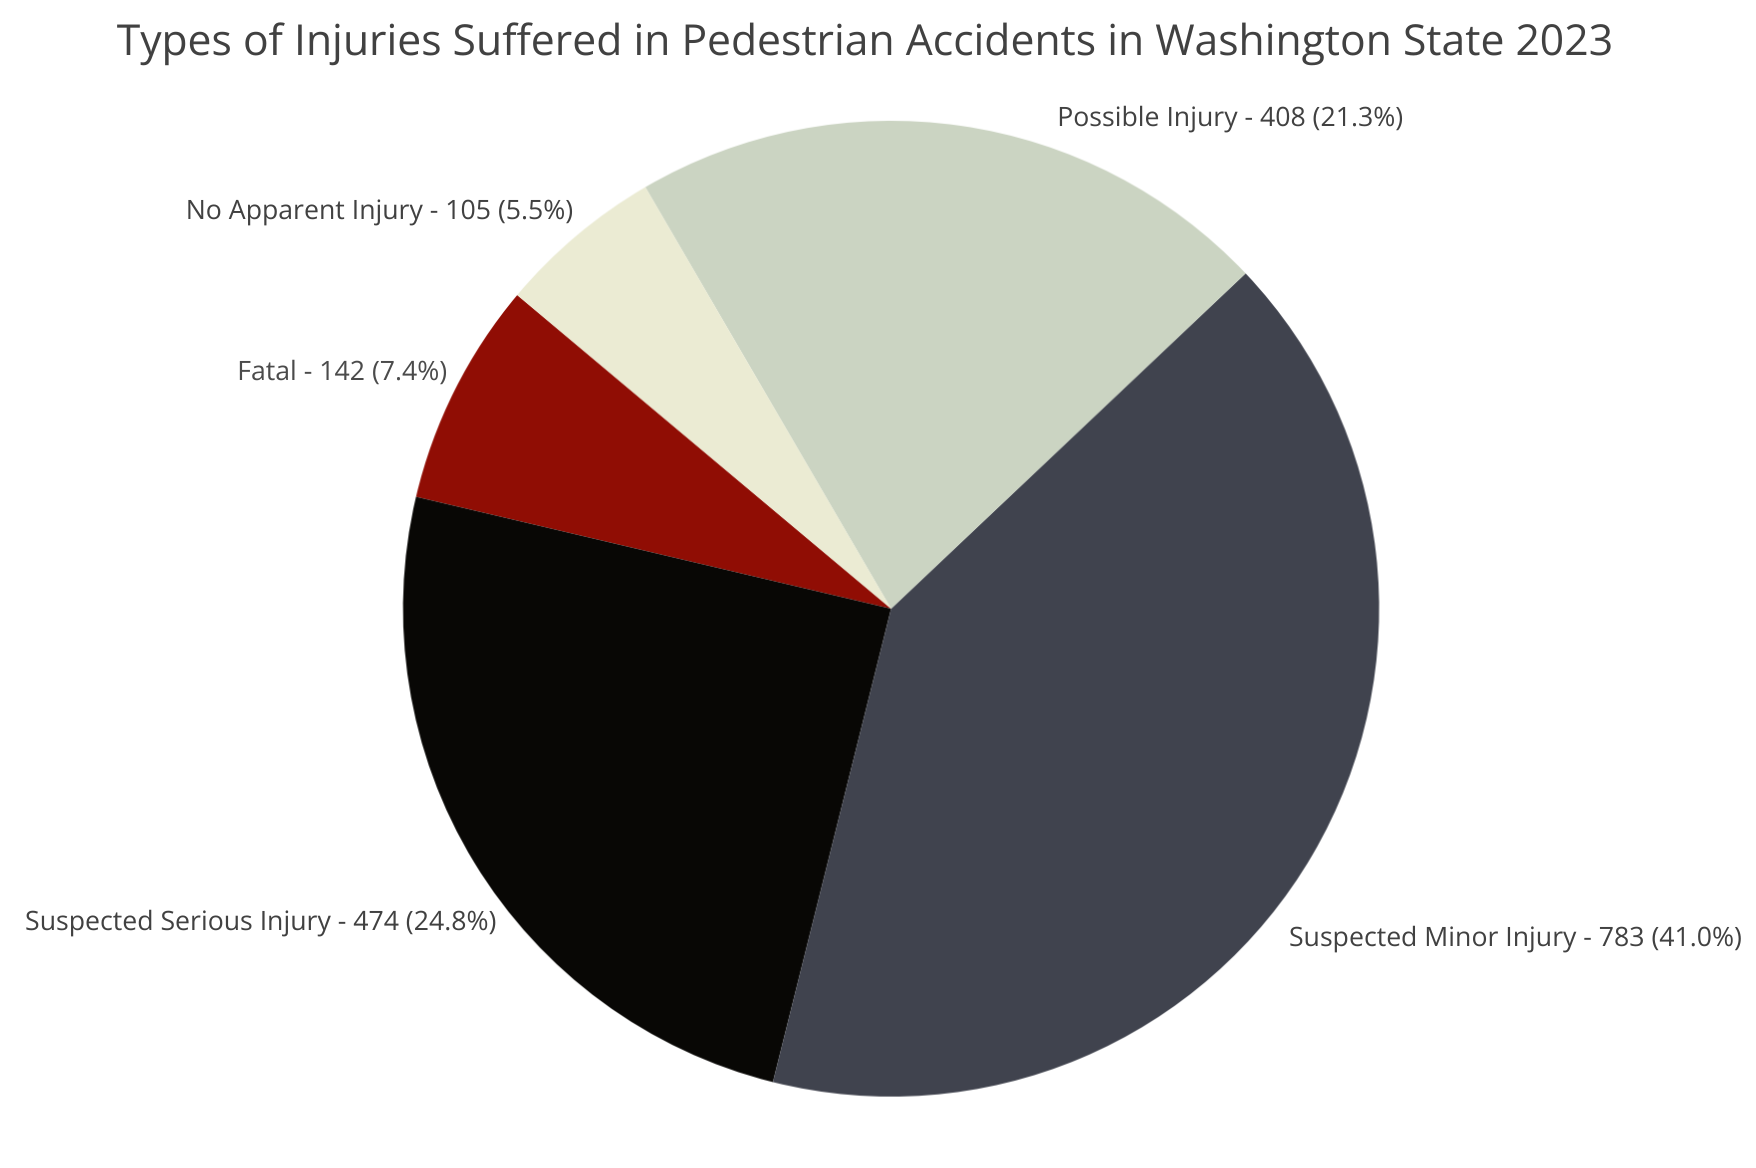 Types of Injuries Suffered in Pedestrian Accidents in Washington State, 2023